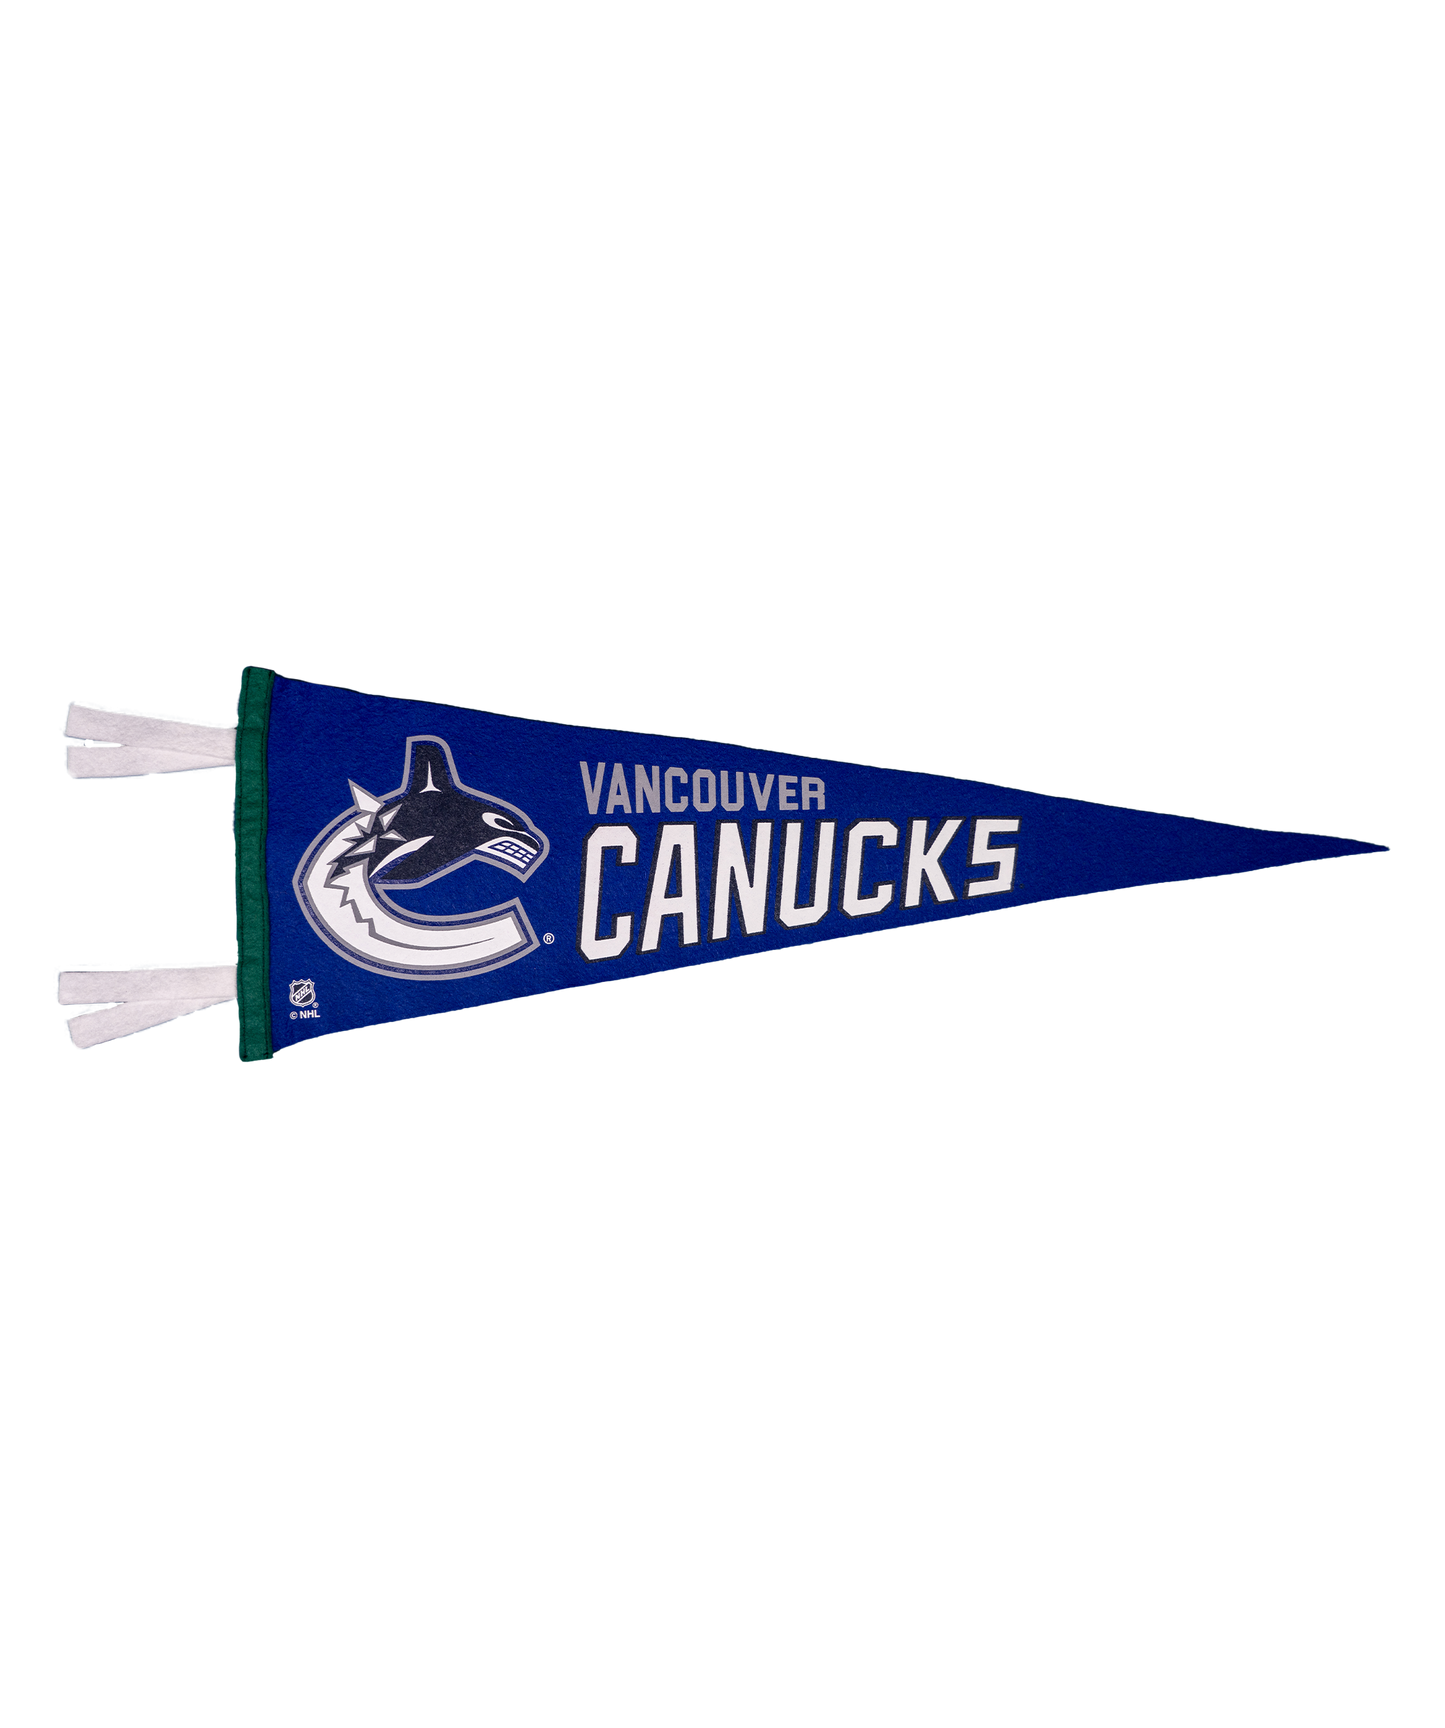 Vancouver Canucks Pennant | NHL x Oxford Pennant